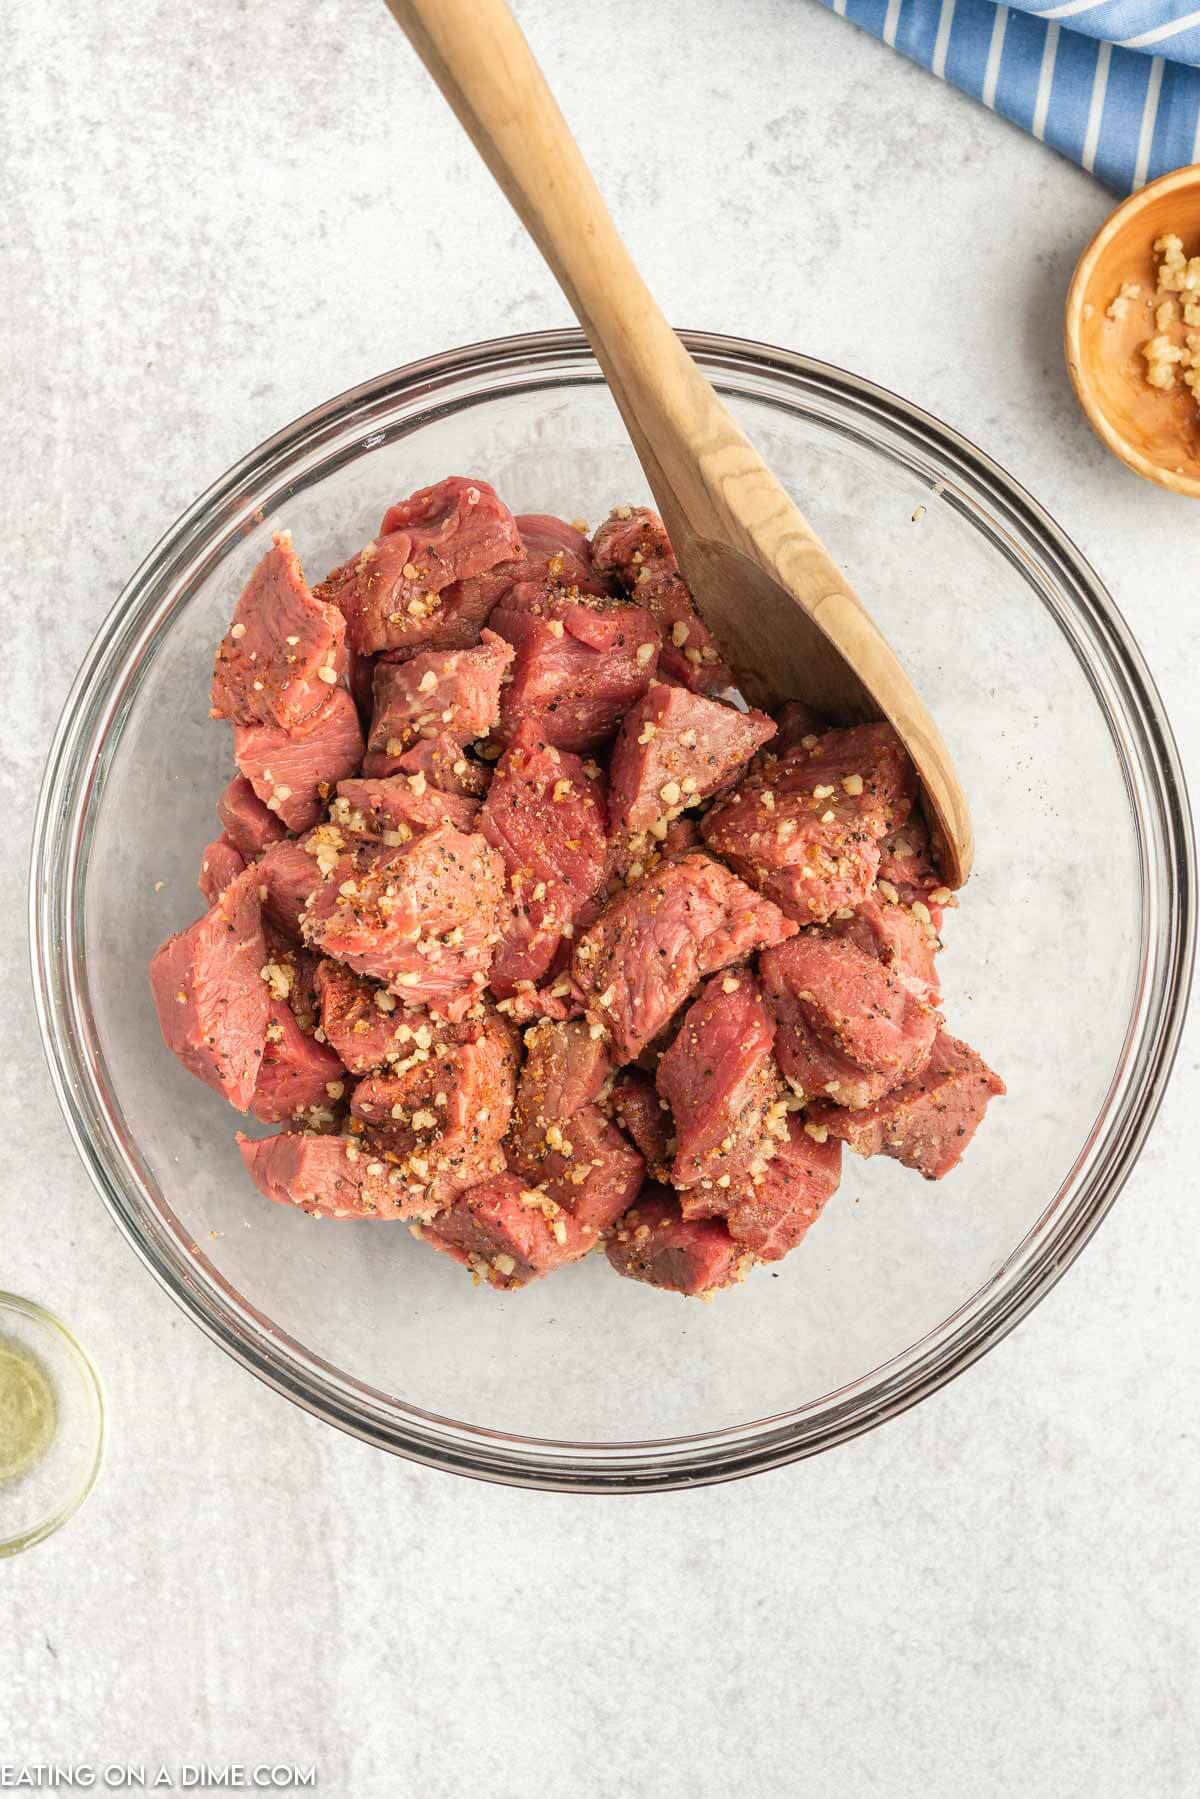 Mixing the steak bites in a bowl with the marinade